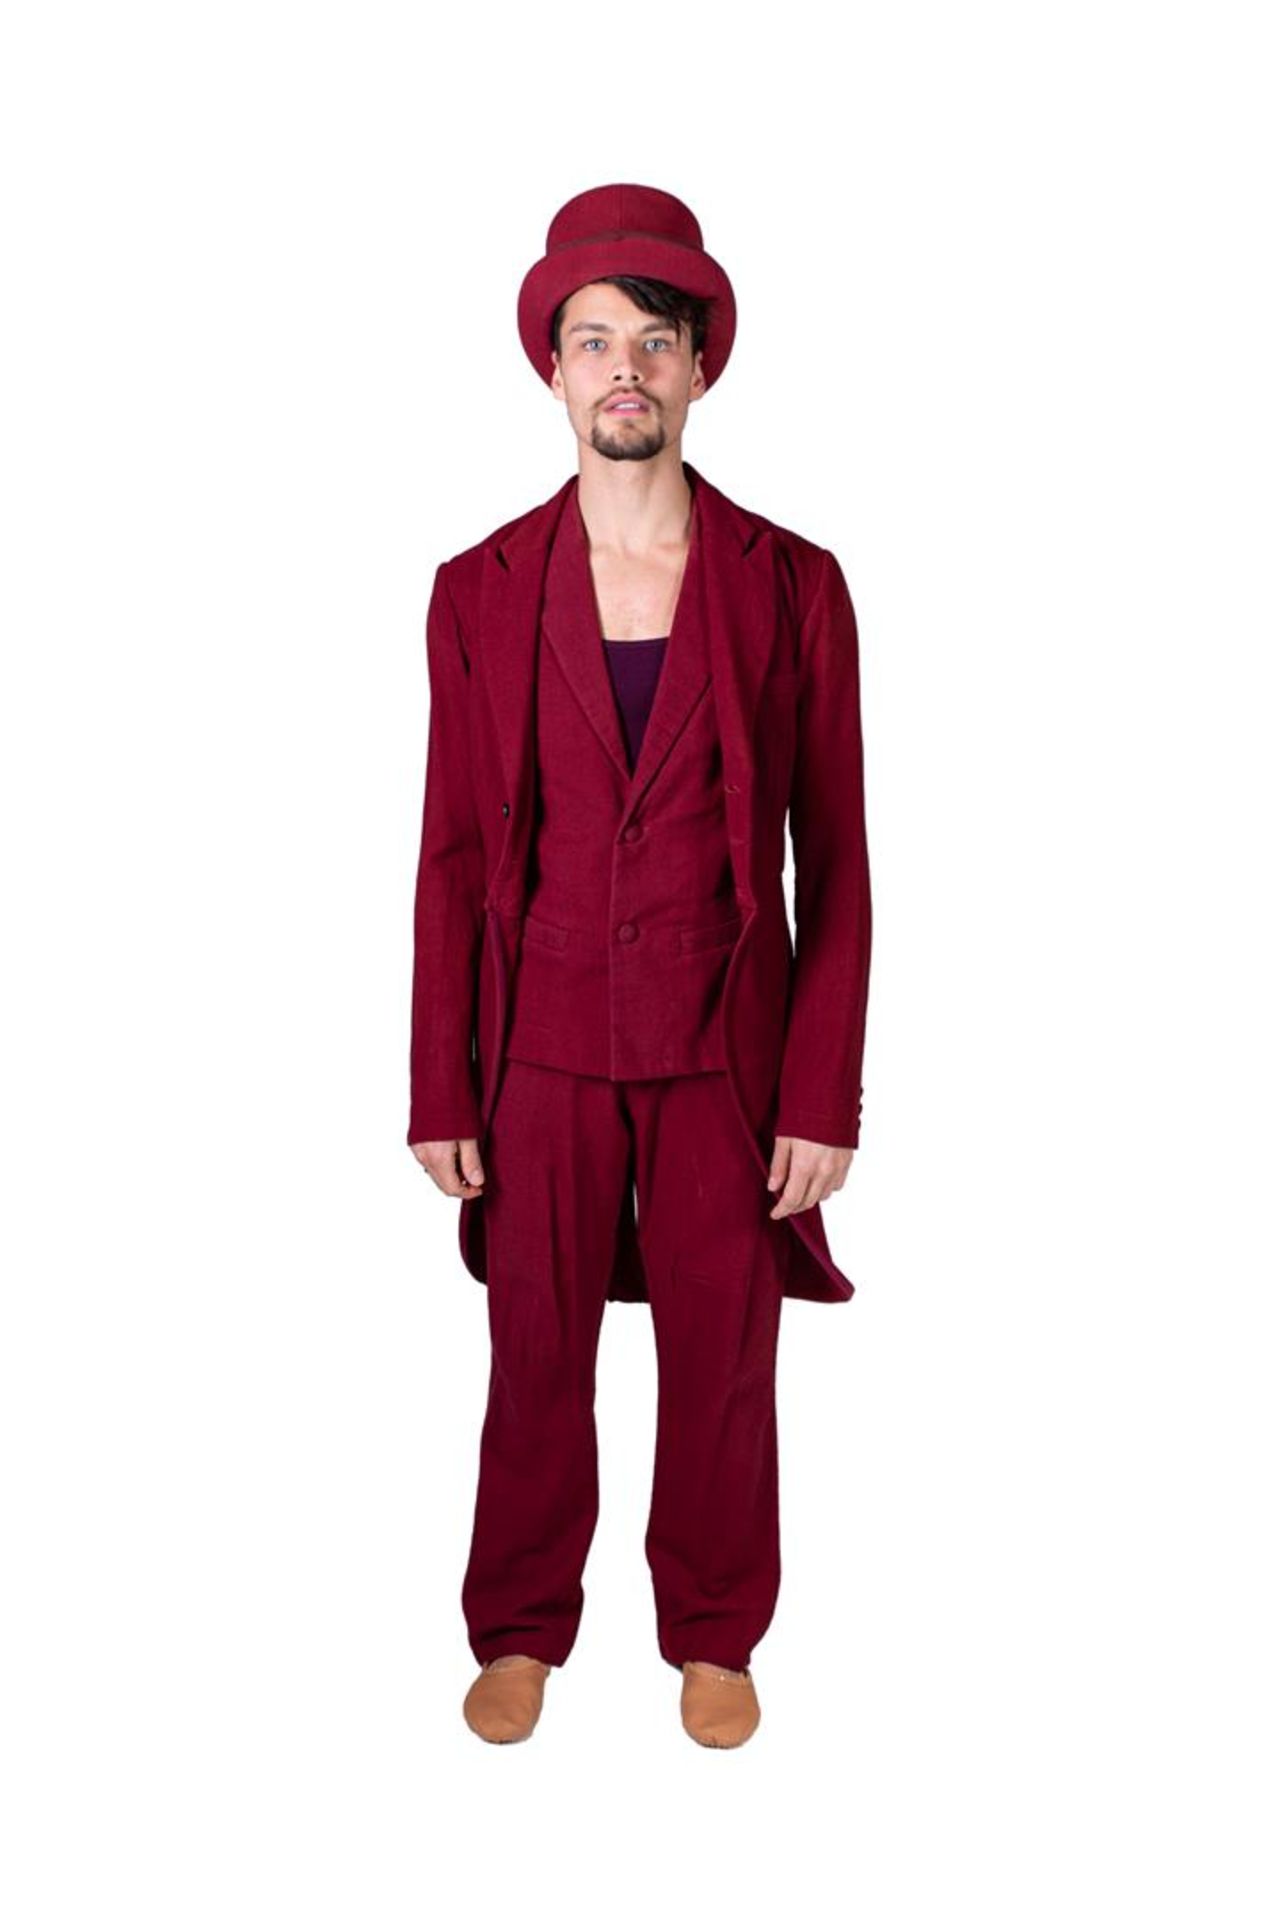 Red men's suit (jacket, waistcoat, trousers) and top hat